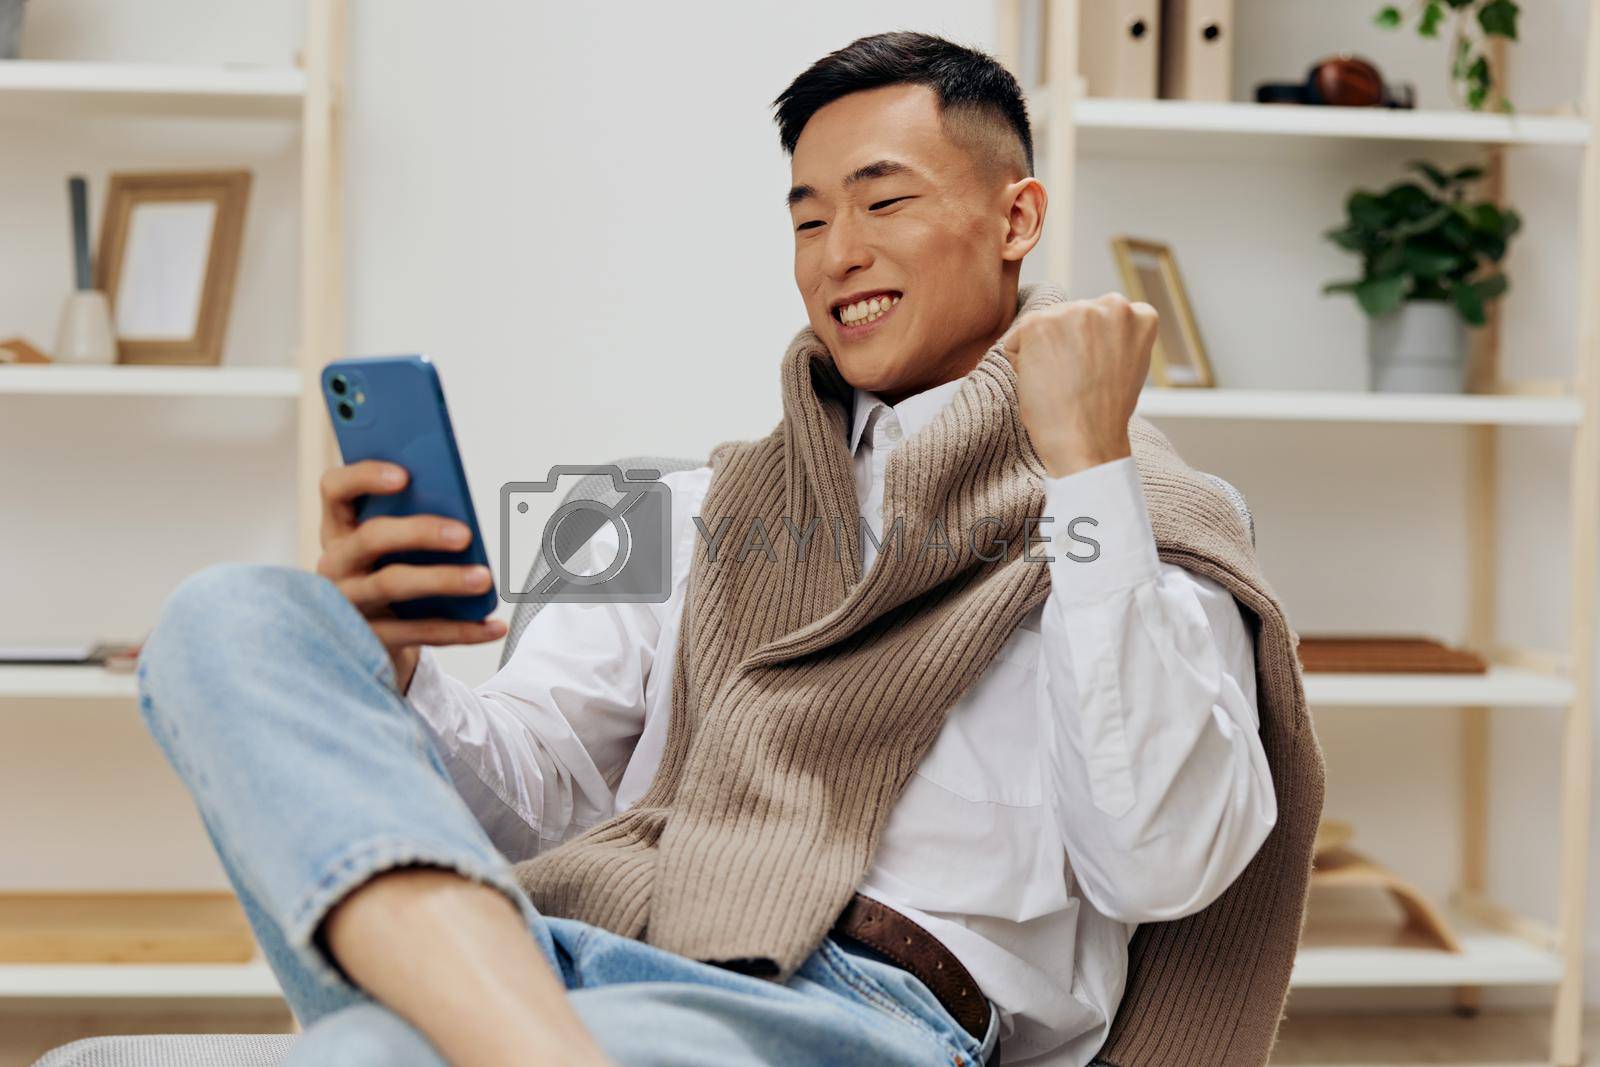 Asian man communication with the phone in his hands sits on a chair interior technologies. High quality photo